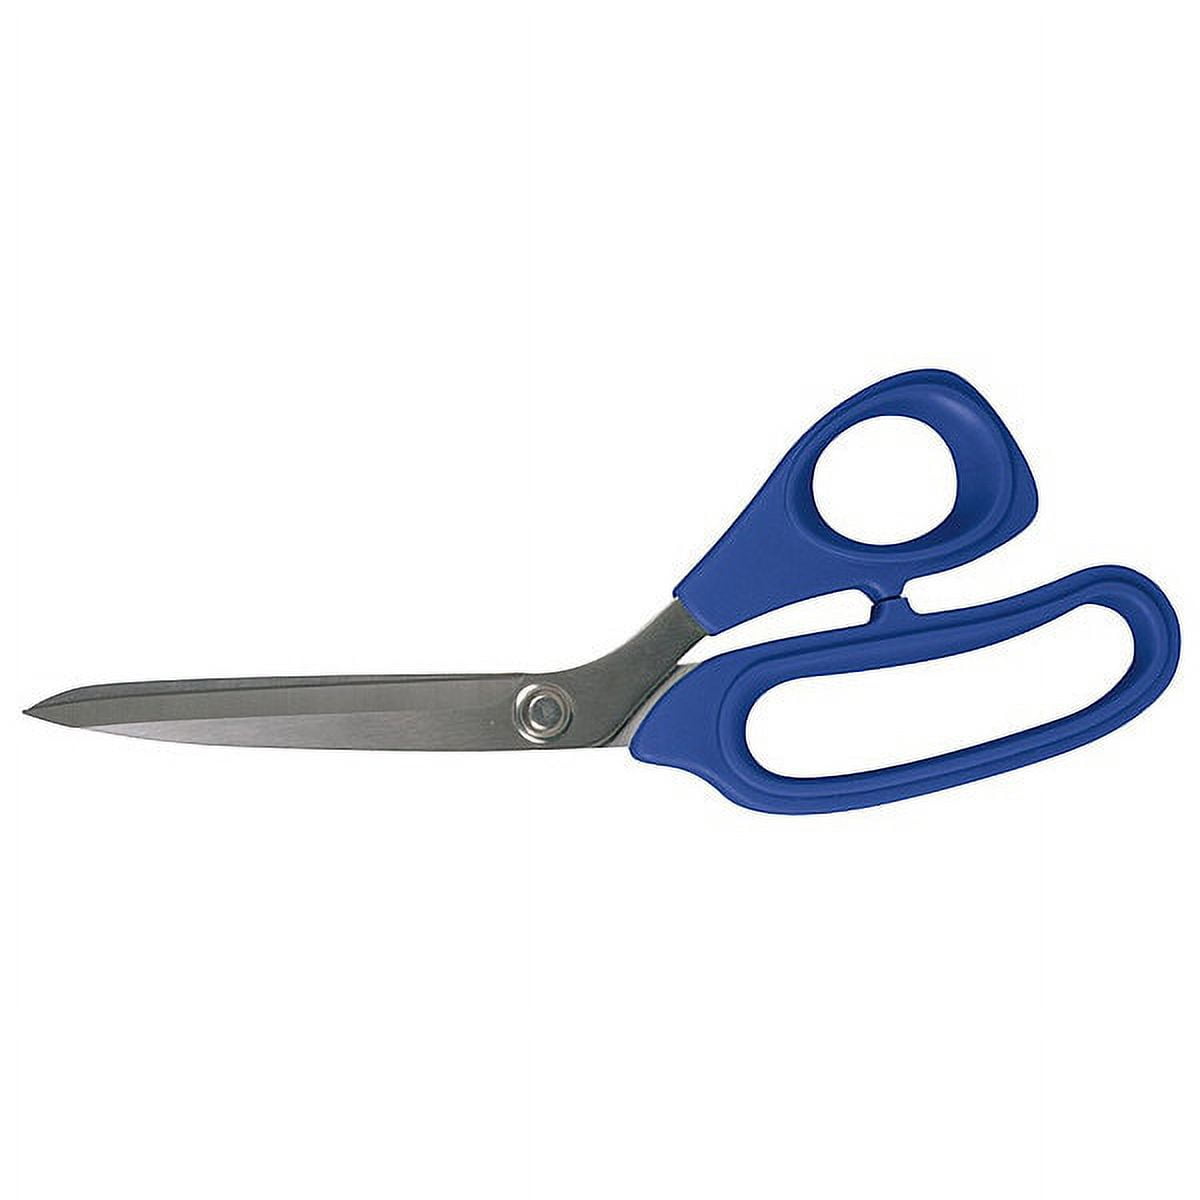 Benbow Learning Scissors, Assistive Technology